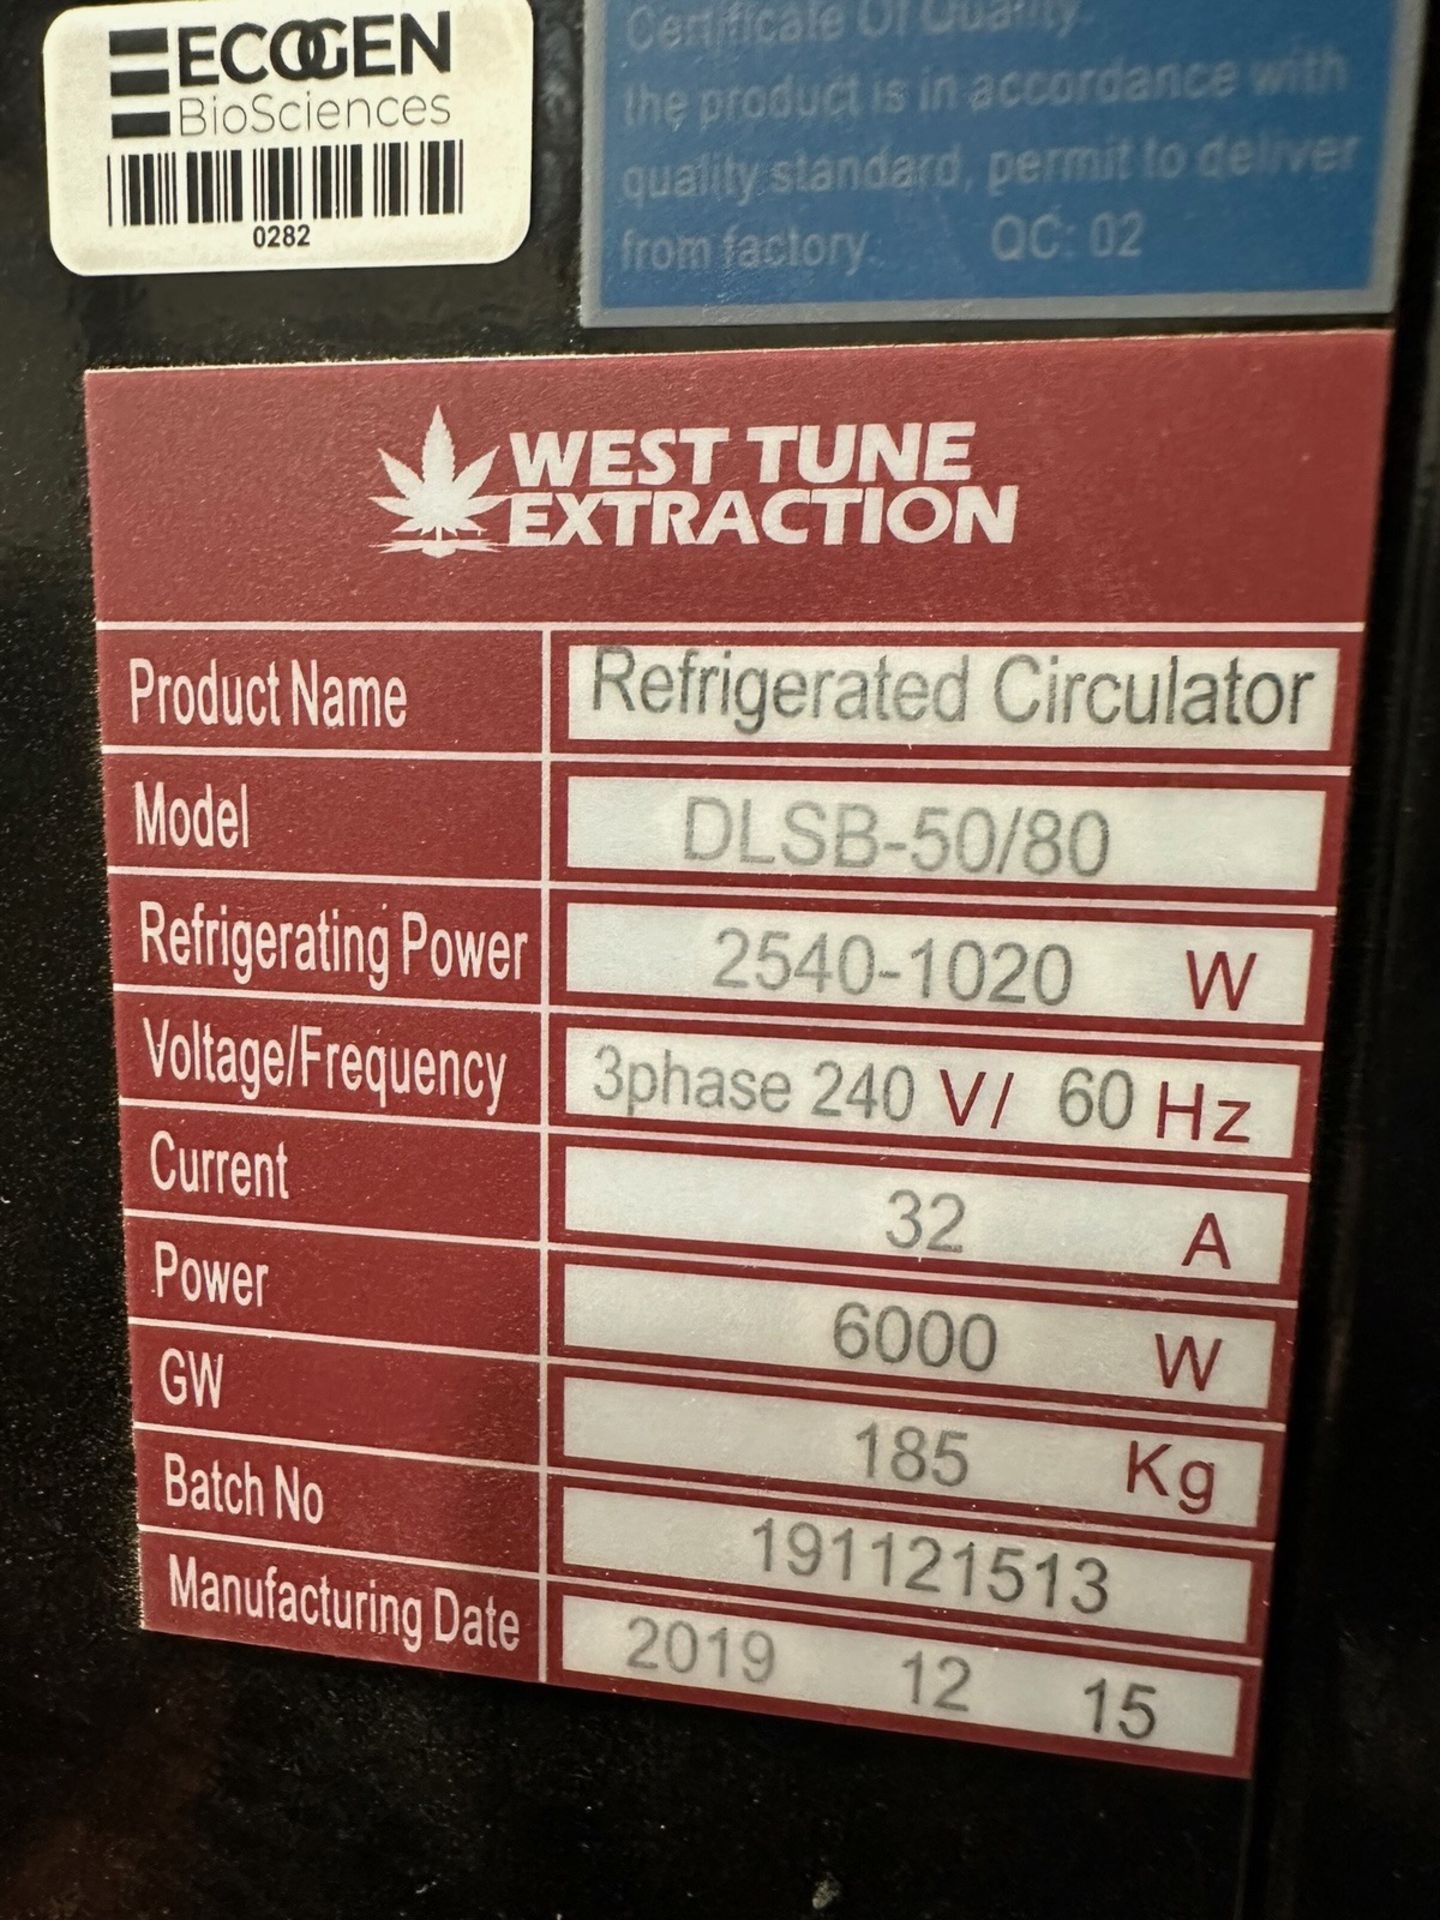 West Tune Extraction Refrigerated Circulator, Model, DLSB-50/80 Year 2019 | Rig Fee $200 - Image 5 of 5